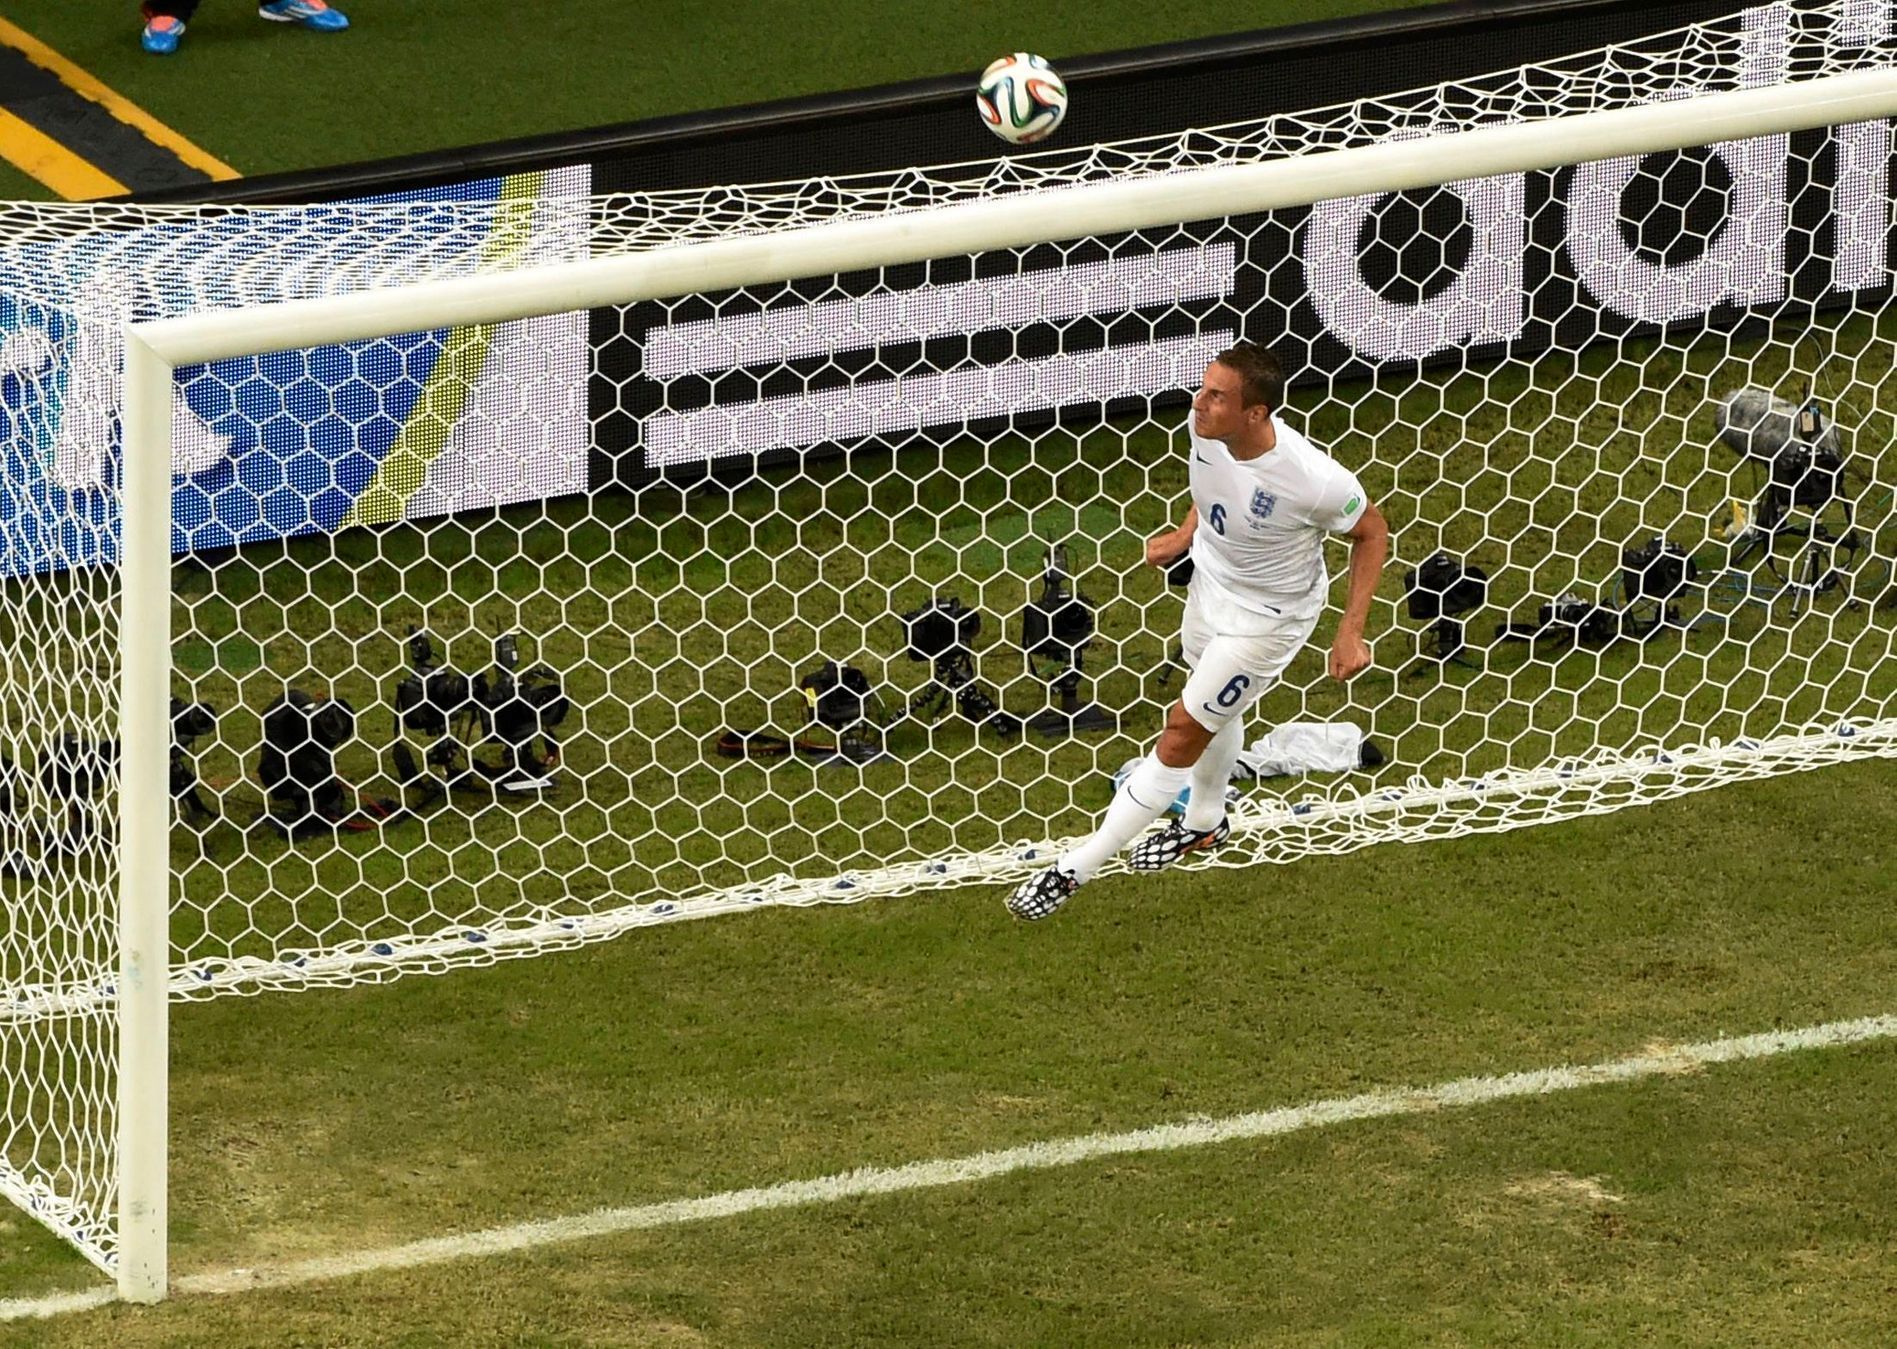 England's Jagielka saves the ball during the 2014 World Cup Group D soccer match between England and Italy at the Amazonia arena in Manaus